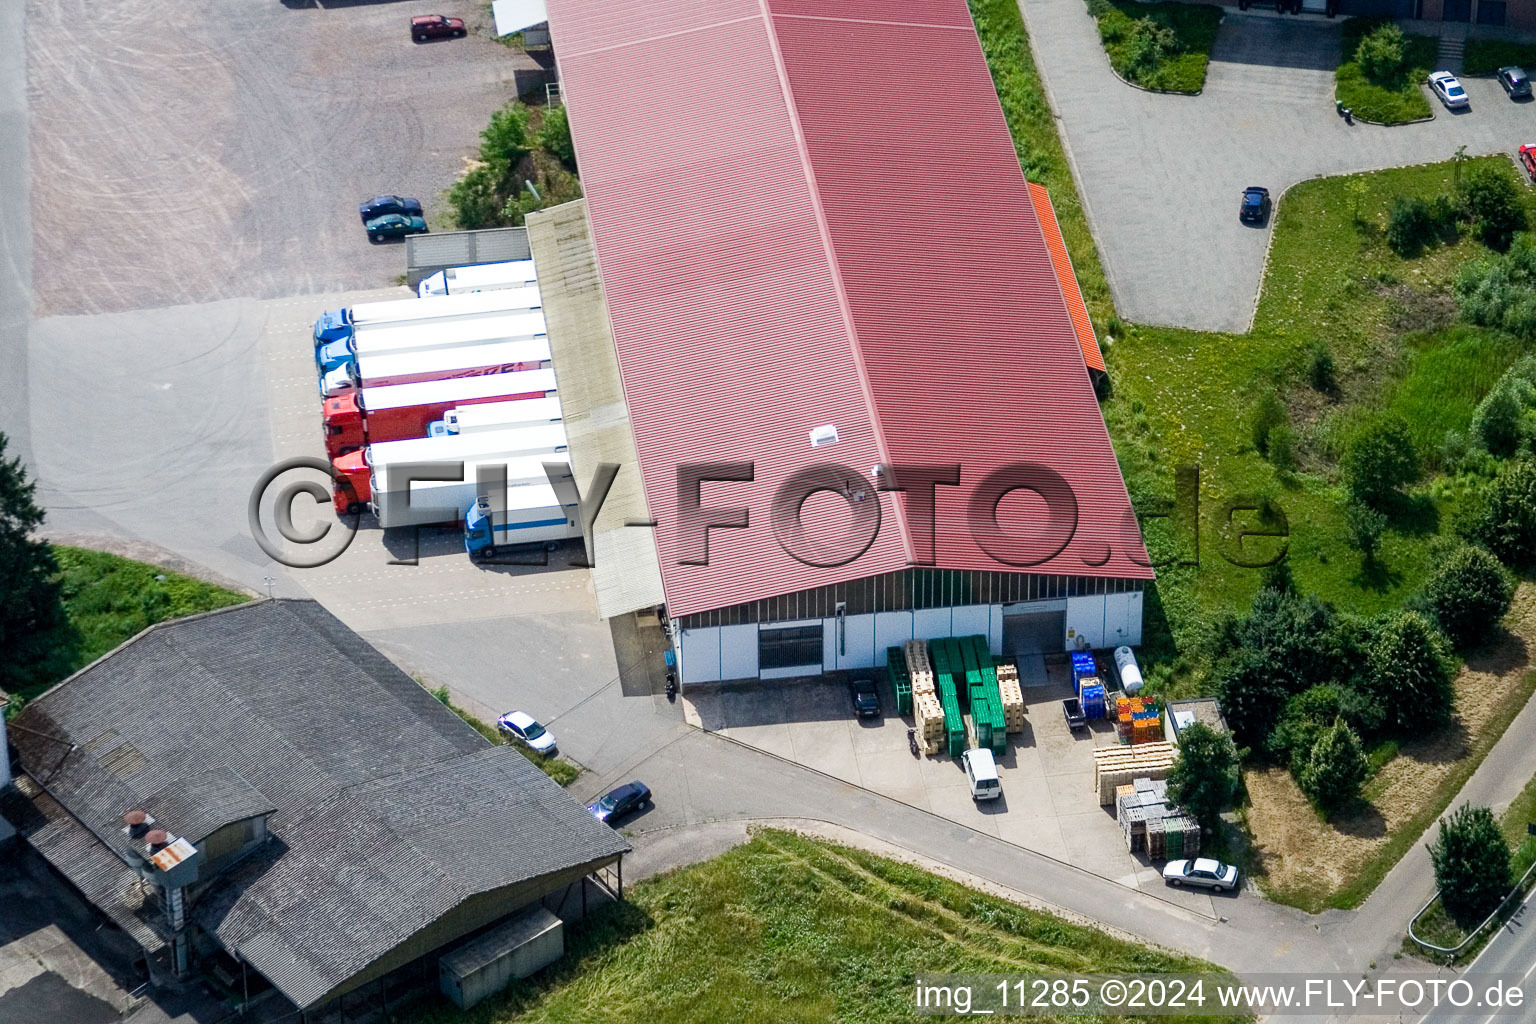 Spedition Nuss in the West Business Park in the district Herxheim in Herxheim bei Landau/Pfalz in the state Rhineland-Palatinate, Germany from above